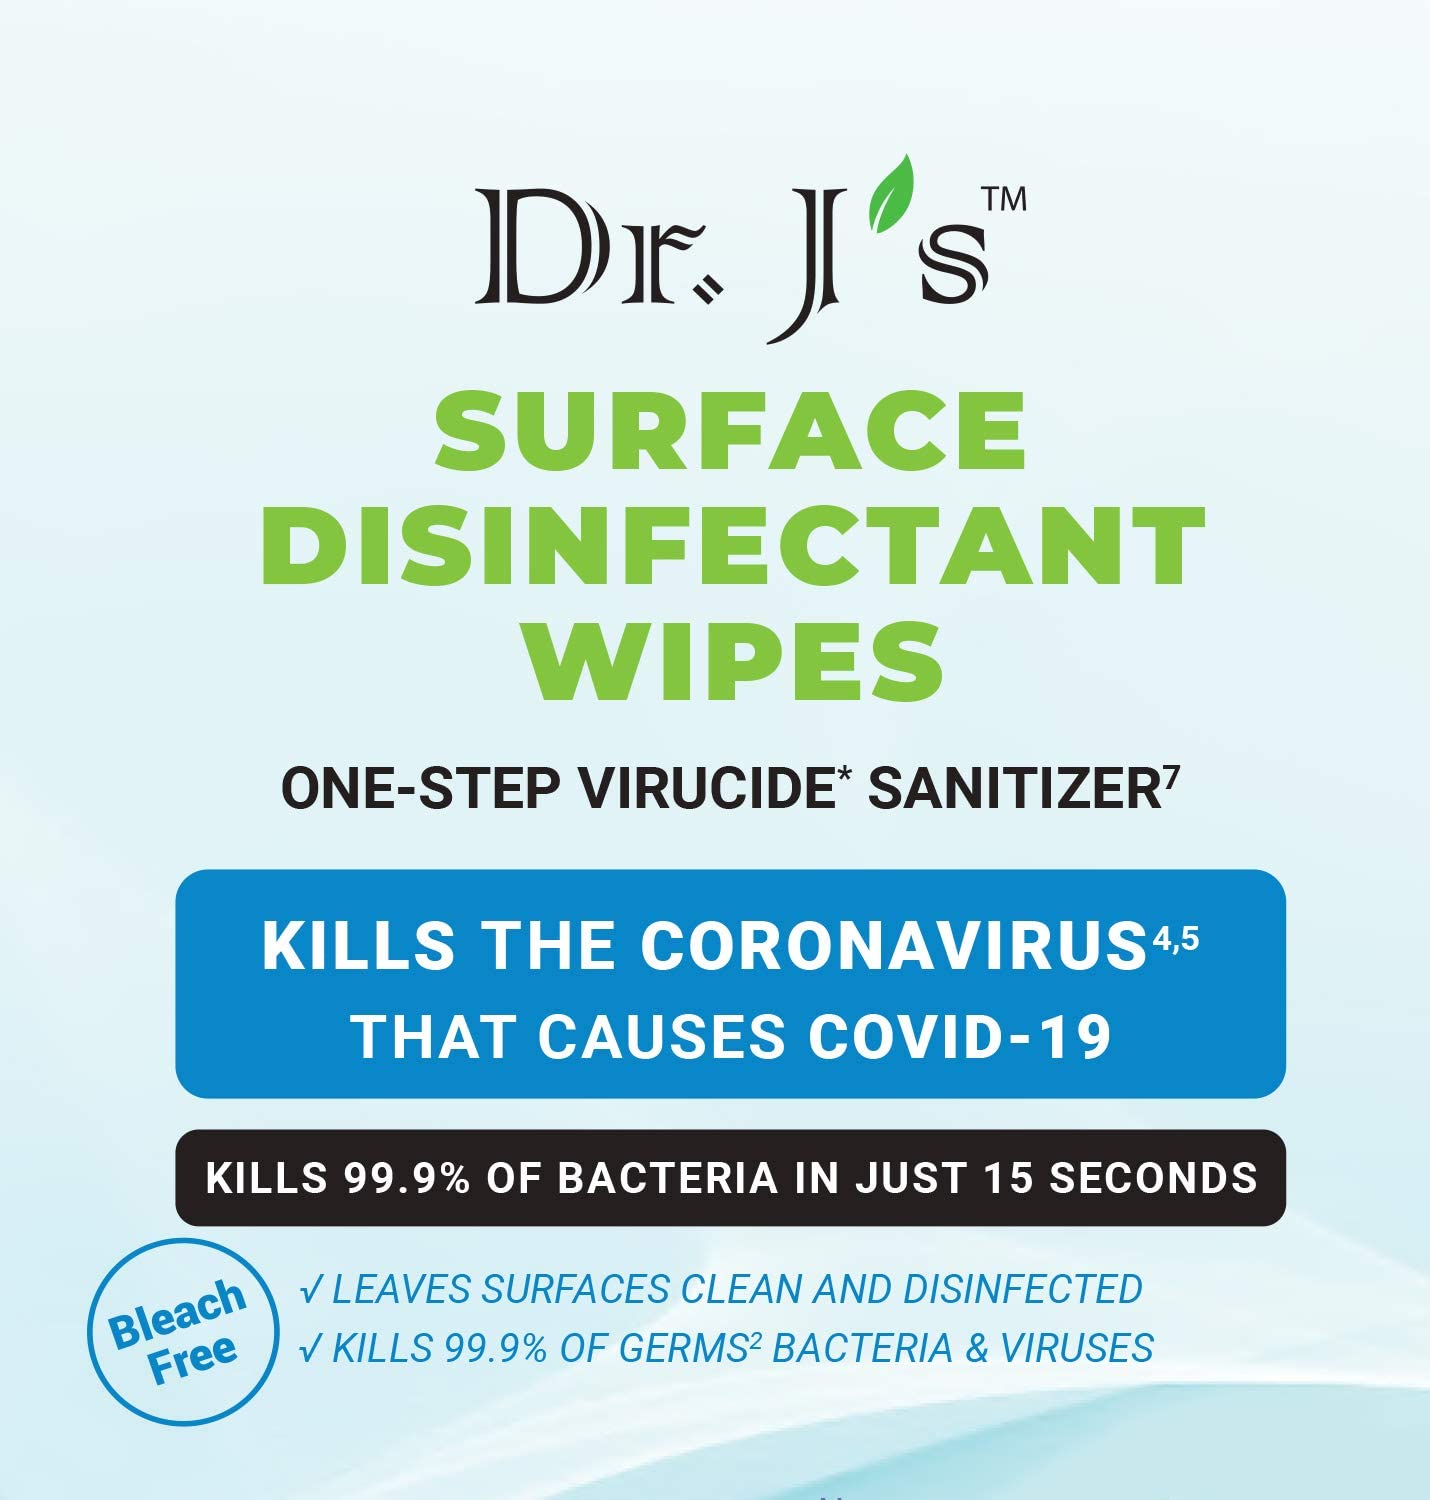 Dr. J's Surface Disinfectant Wipes (160 count)